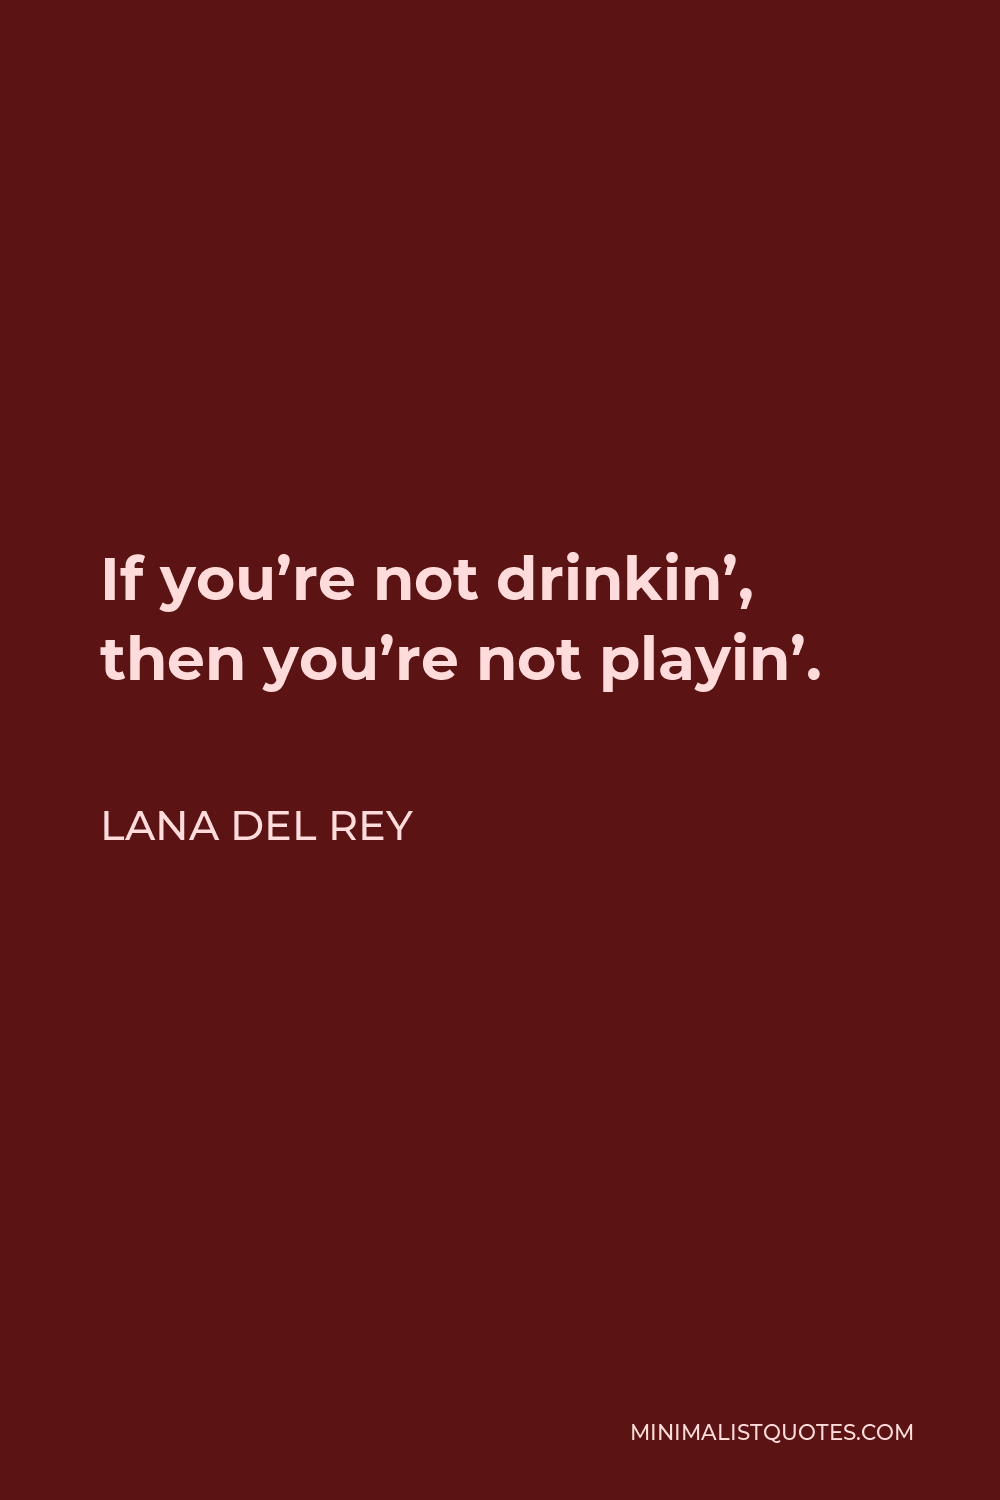 Lana Del Rey Quote - If you’re not drinkin’, then you’re not playin’.